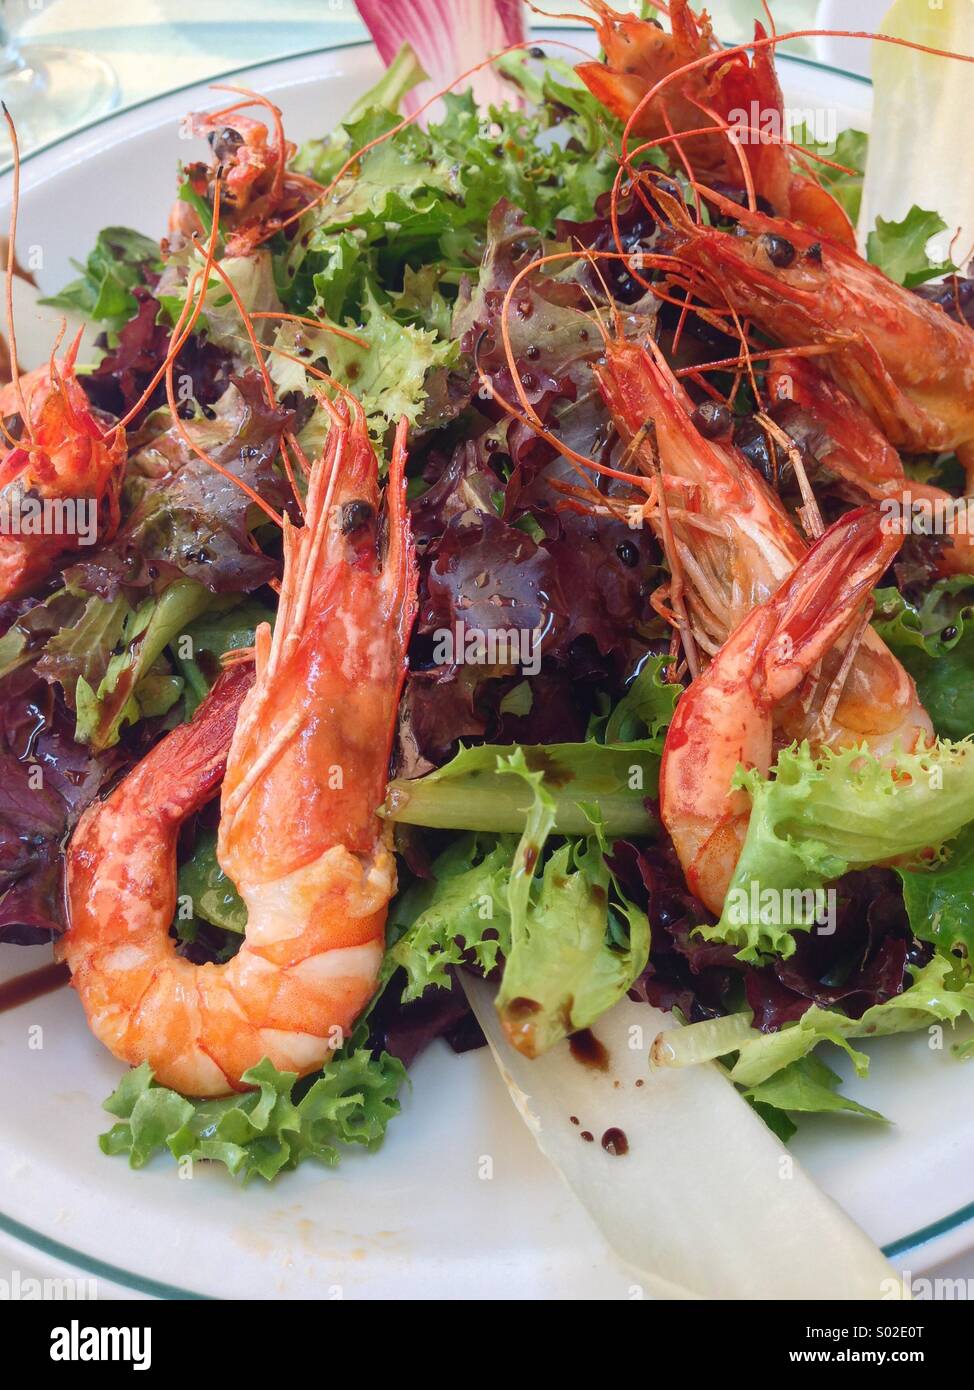 Shrimps seafood with green salad Stock Photo